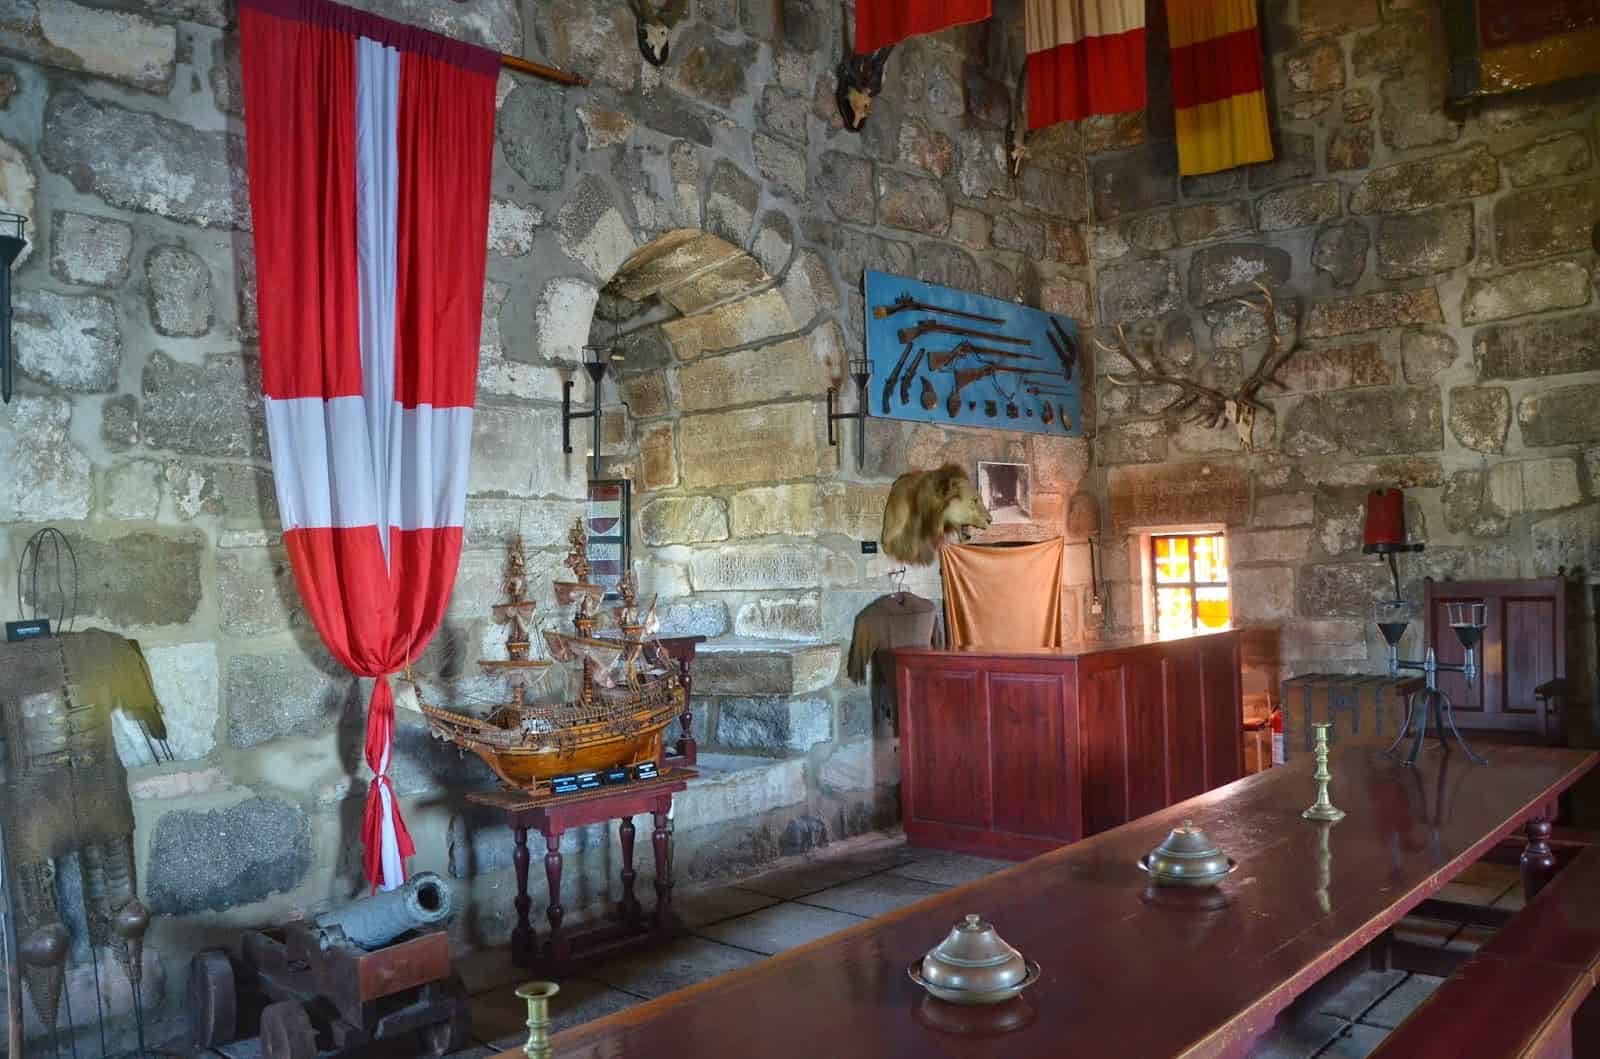 Former decorations in the English Tower